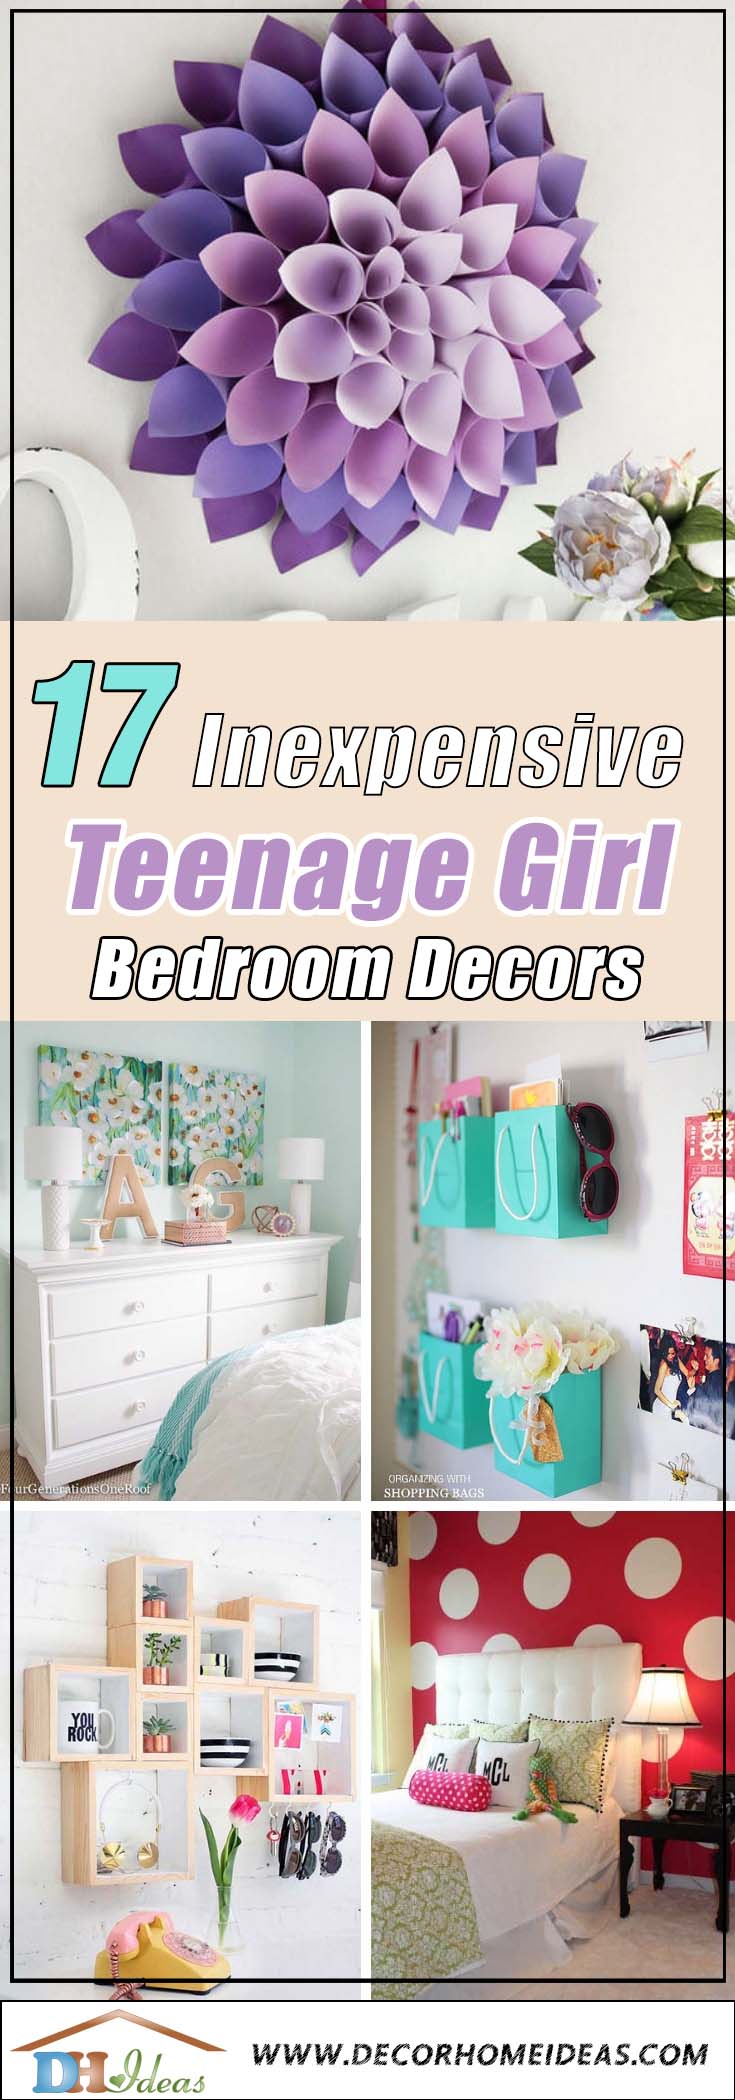 17 Cheap ways to decorate a teenage girls bedroom | Best DIY and inexpensive ideas on girls bedroom decoration #bedroom #teen #girl #homedecor #decoratingideas #diy #furniture #decorhomeideas